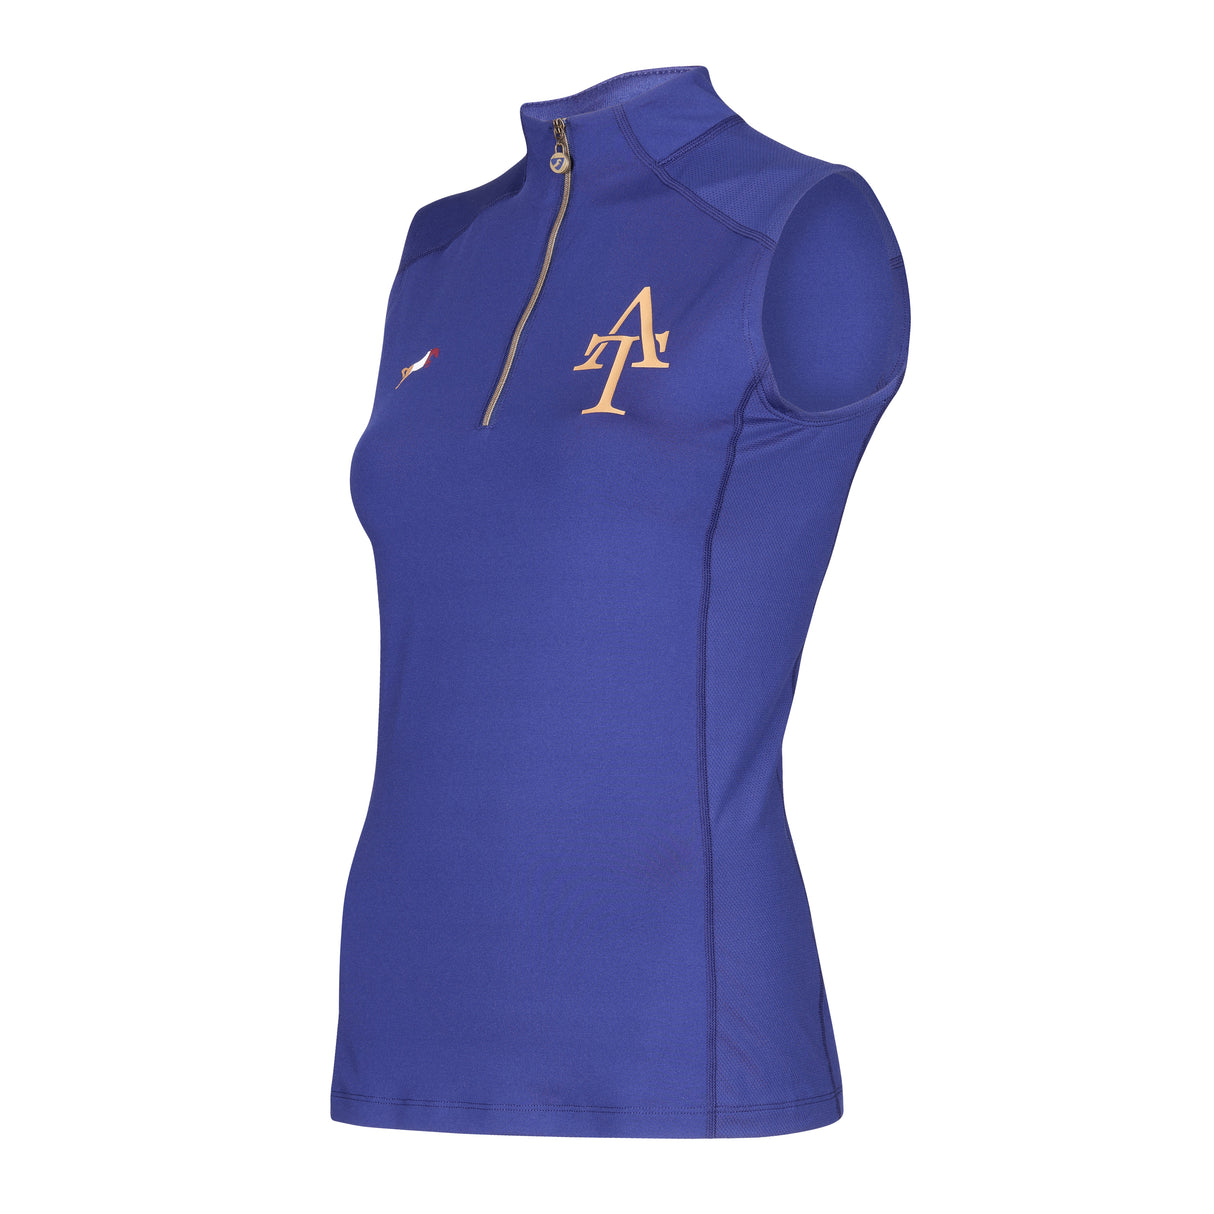 Shires Aubrion Team Sleeveless Base Layer #colour_navy